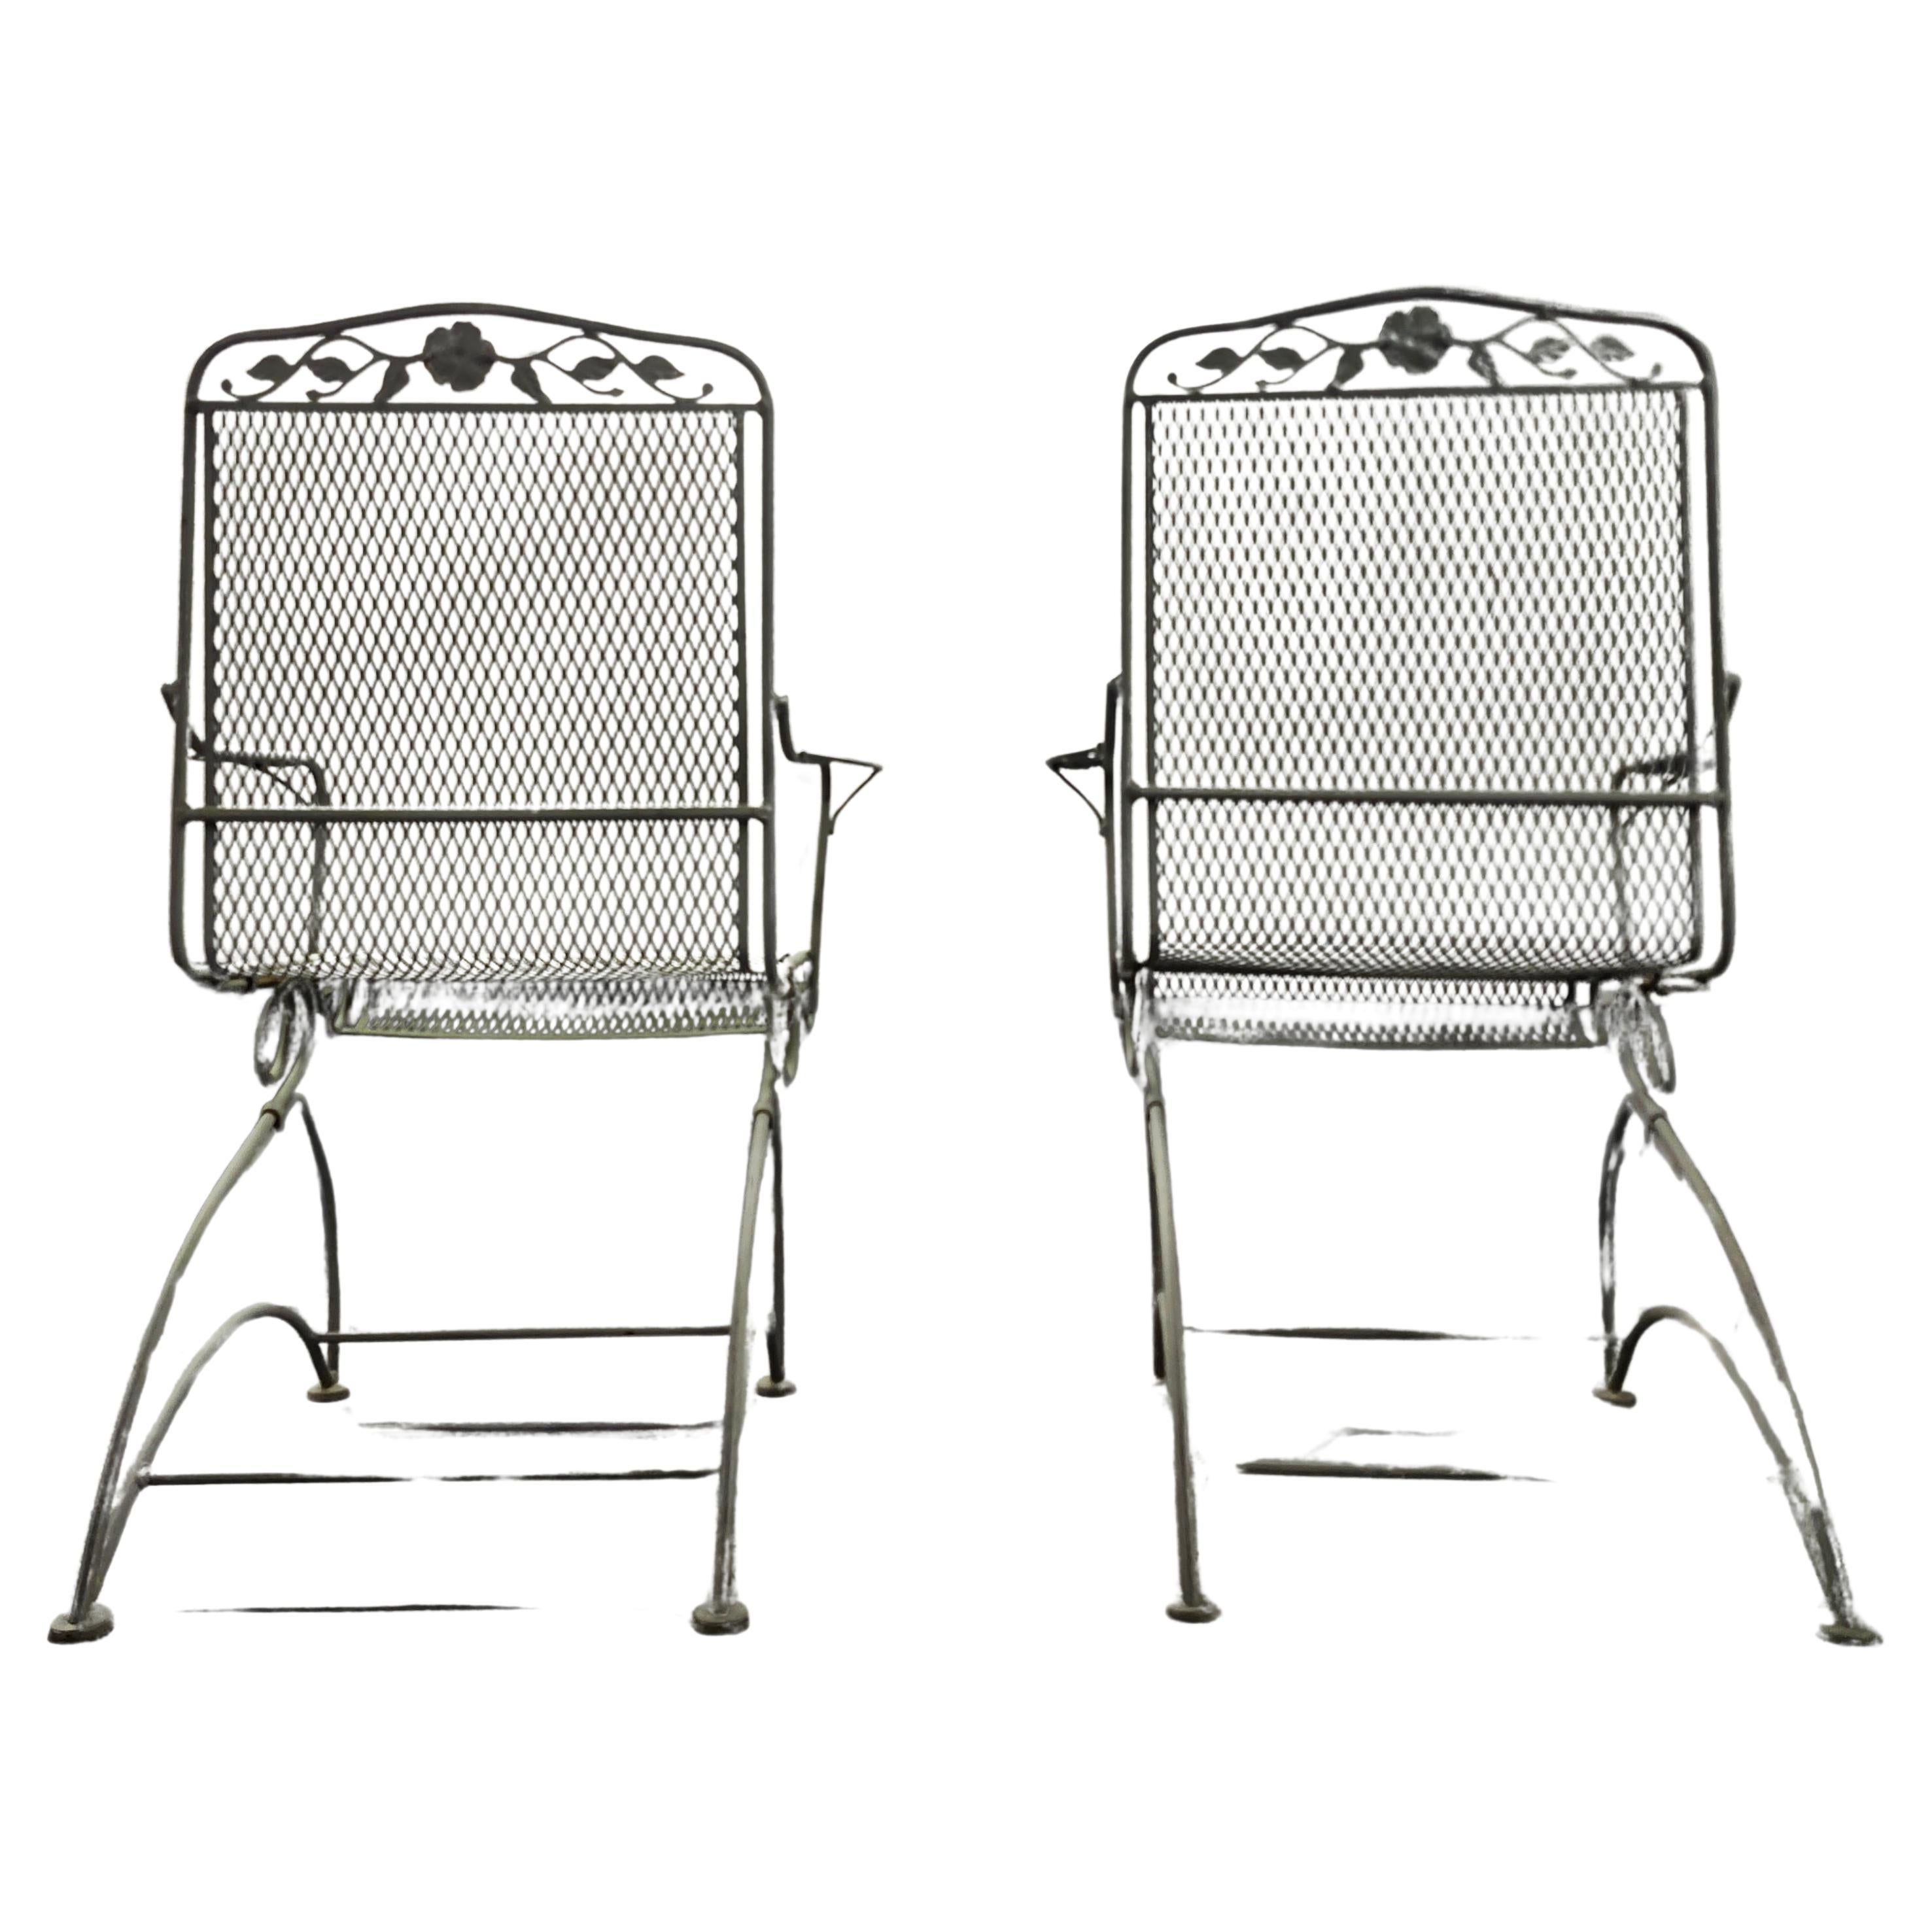 Available now for your enjoyment and ready to ship is a Pair of Vintage Wrought Iron Patio Chairs by Woodard

This lovely Wrought Iron Pair of Chairs are the perfect addition to any garden, terrace, or veranda. Enjoy a glass of lemonade in the late